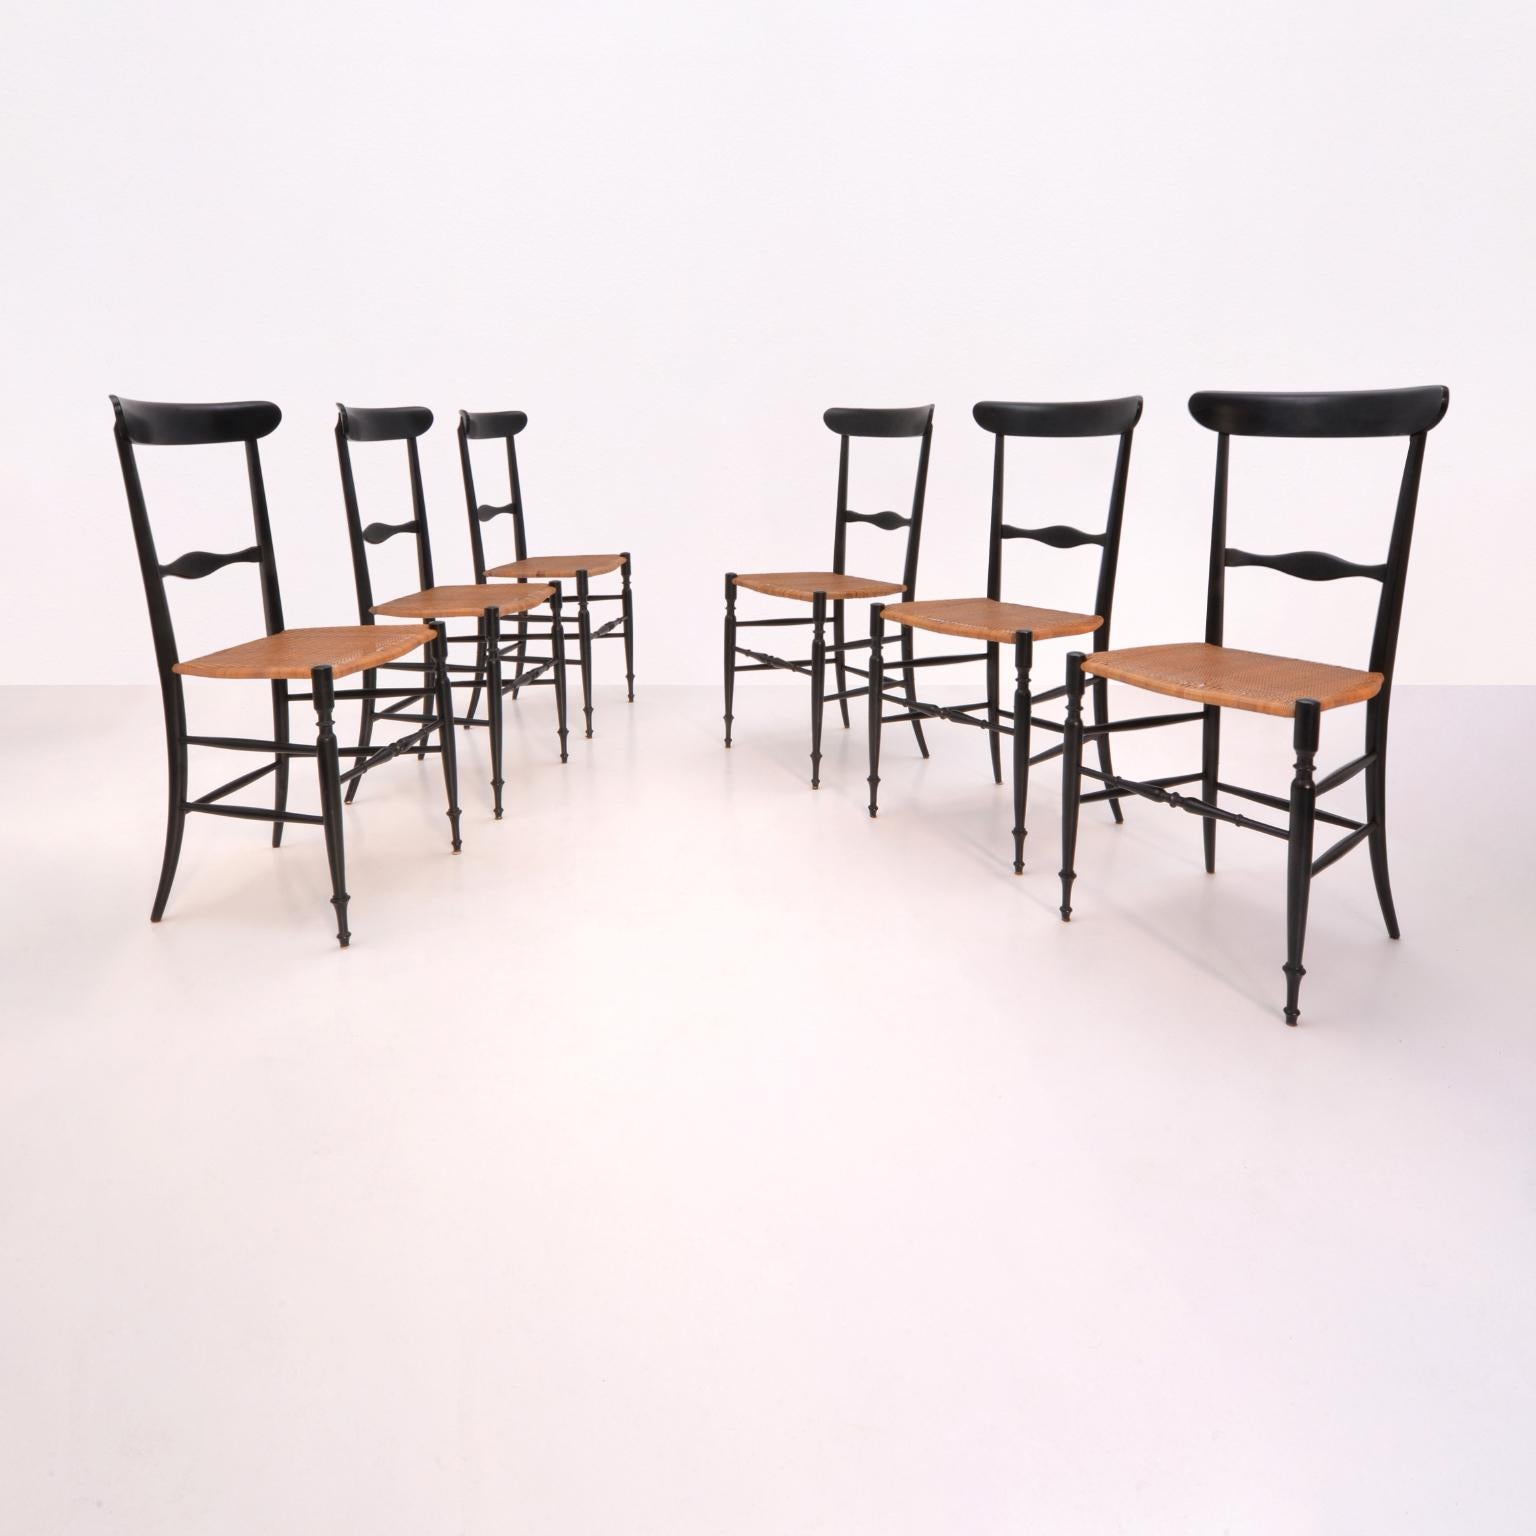 Six super light 'Chiavarina' dining chairs in black lacquered beech, cherry or maple wood with original braided wicker seat. This chair, model 'Campanino' was created by Giuseppe Gaetano Descalzi 'il Campanino' (1767-1855) and manufactured by